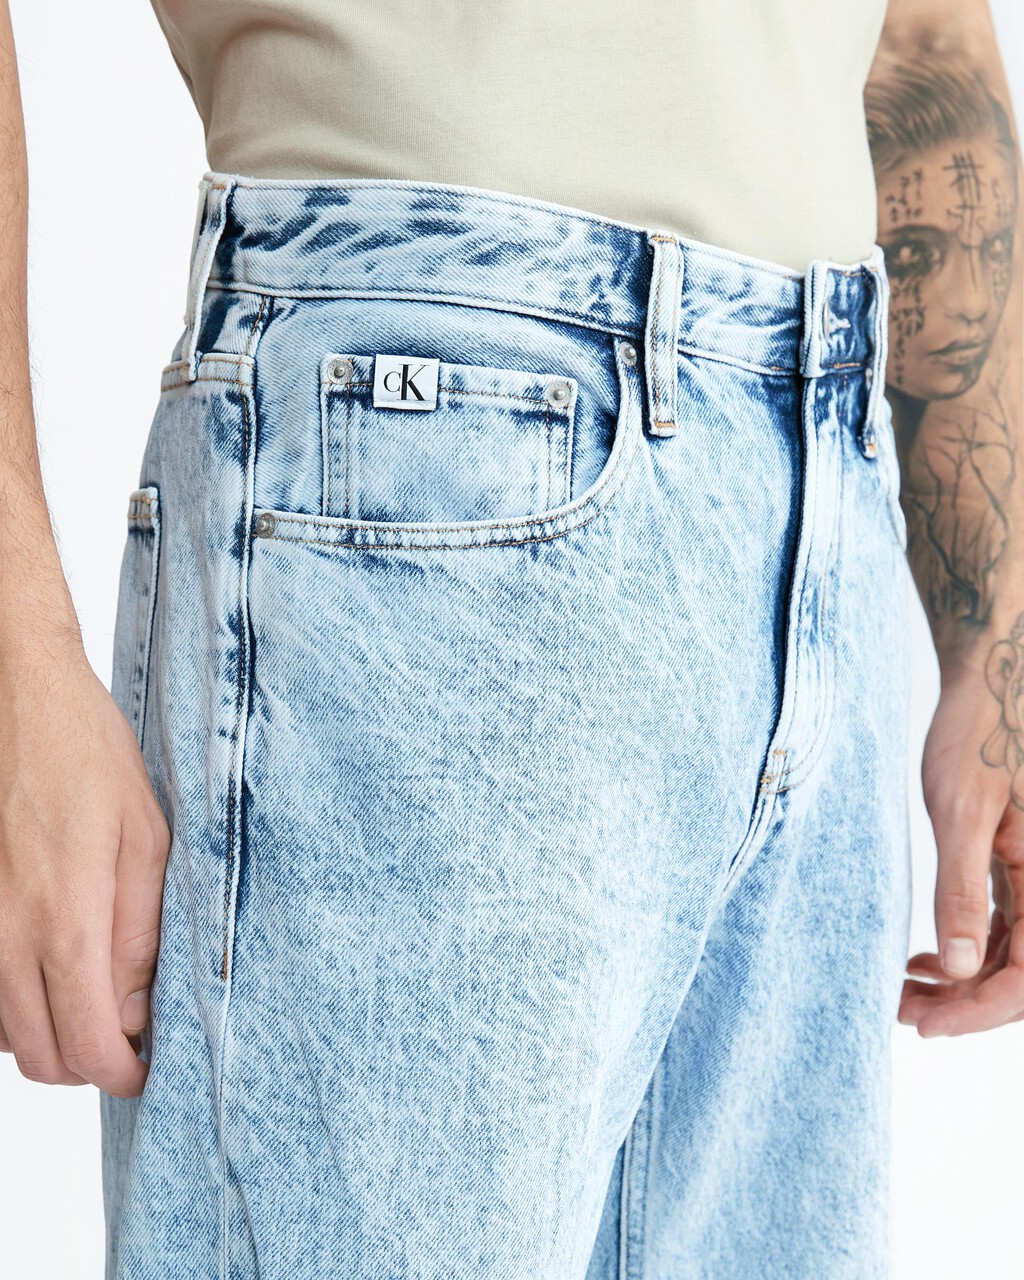 Hyper Real 90S Straight Recycled Cotton Jeans, Denim Light, hi-res